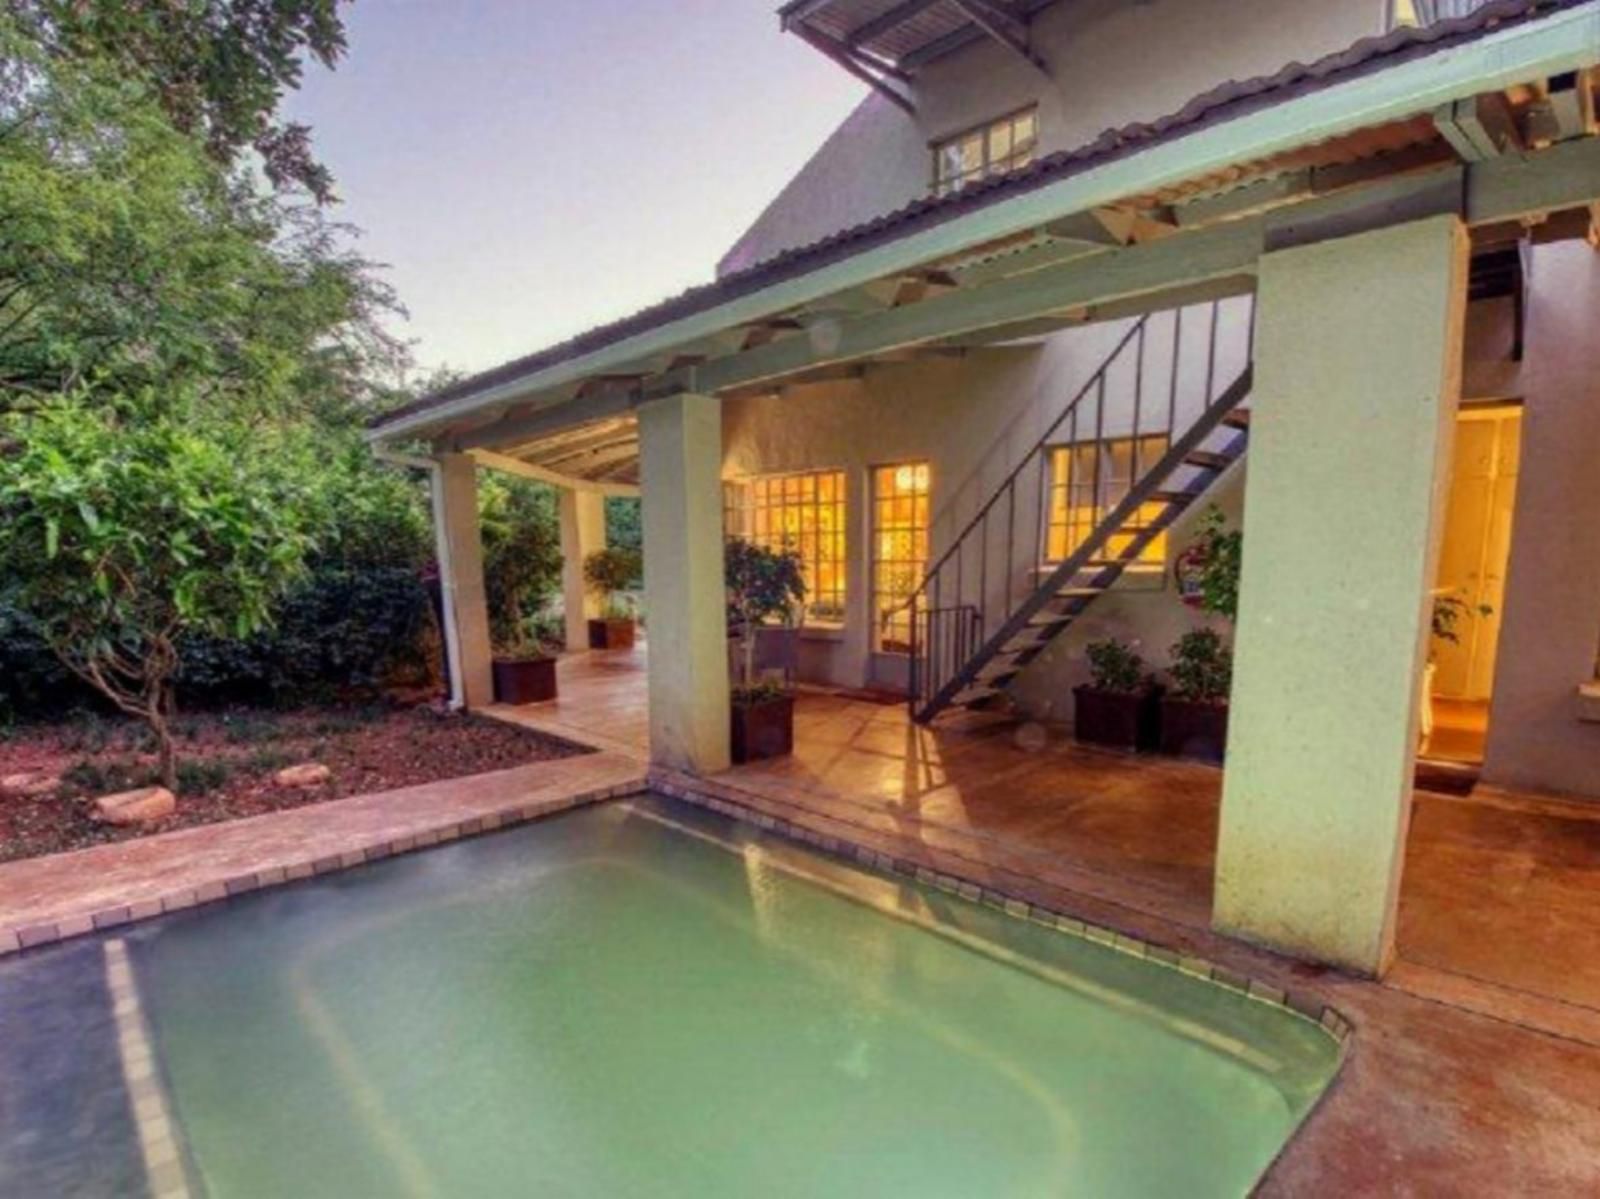 Kruger Park House Hazyview Mpumalanga South Africa House, Building, Architecture, Swimming Pool